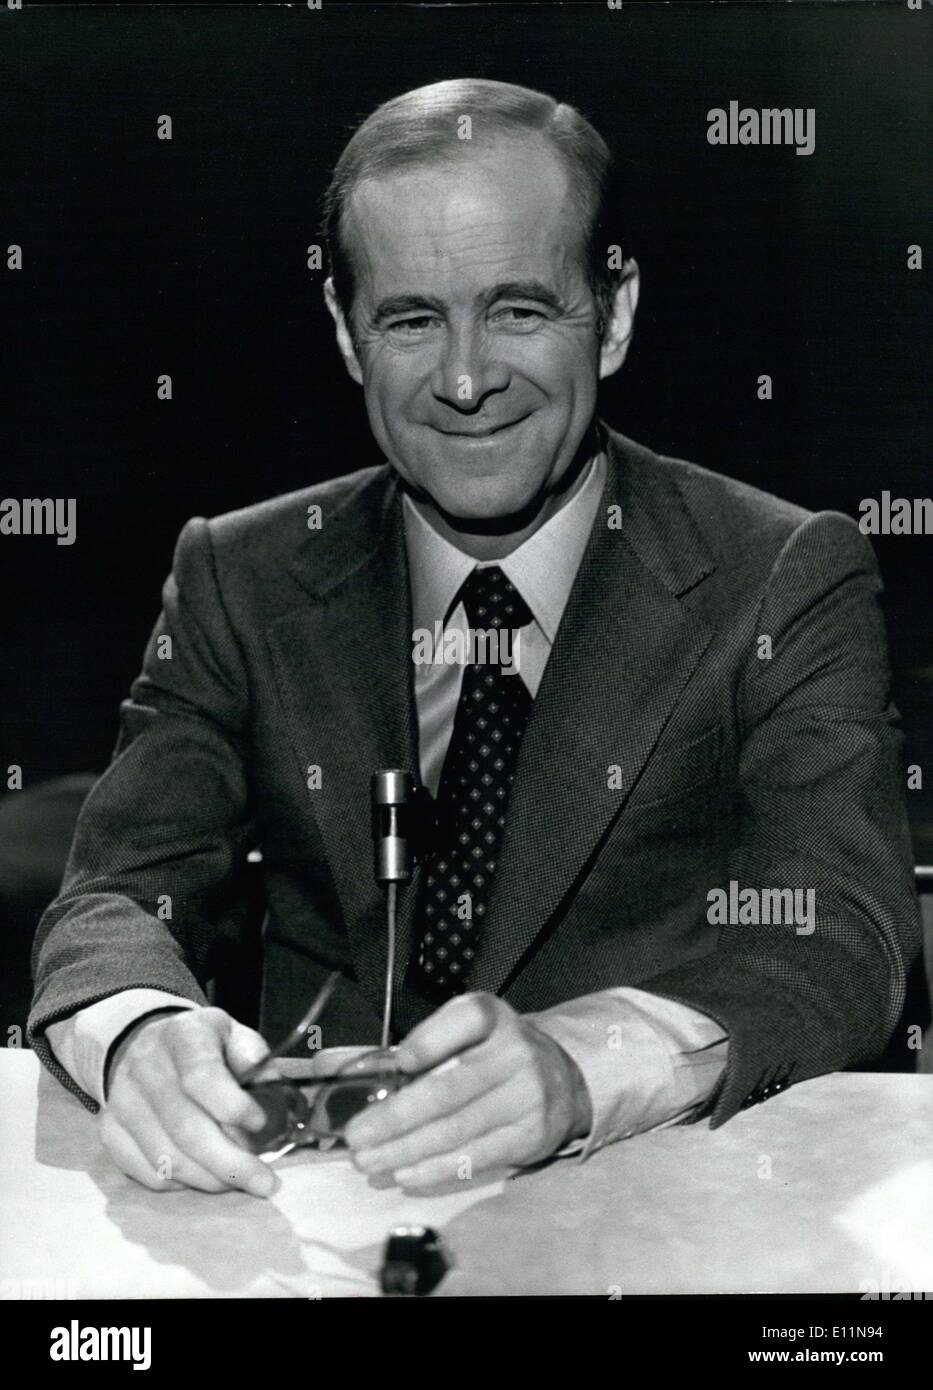 Mar. 20, 1979 - Jean Francois-Poncet, Minister of Foreign Affairs, made his  first appearance on TV during the program ''Cards on the Table''. During  the show, he explained France's role in promoting